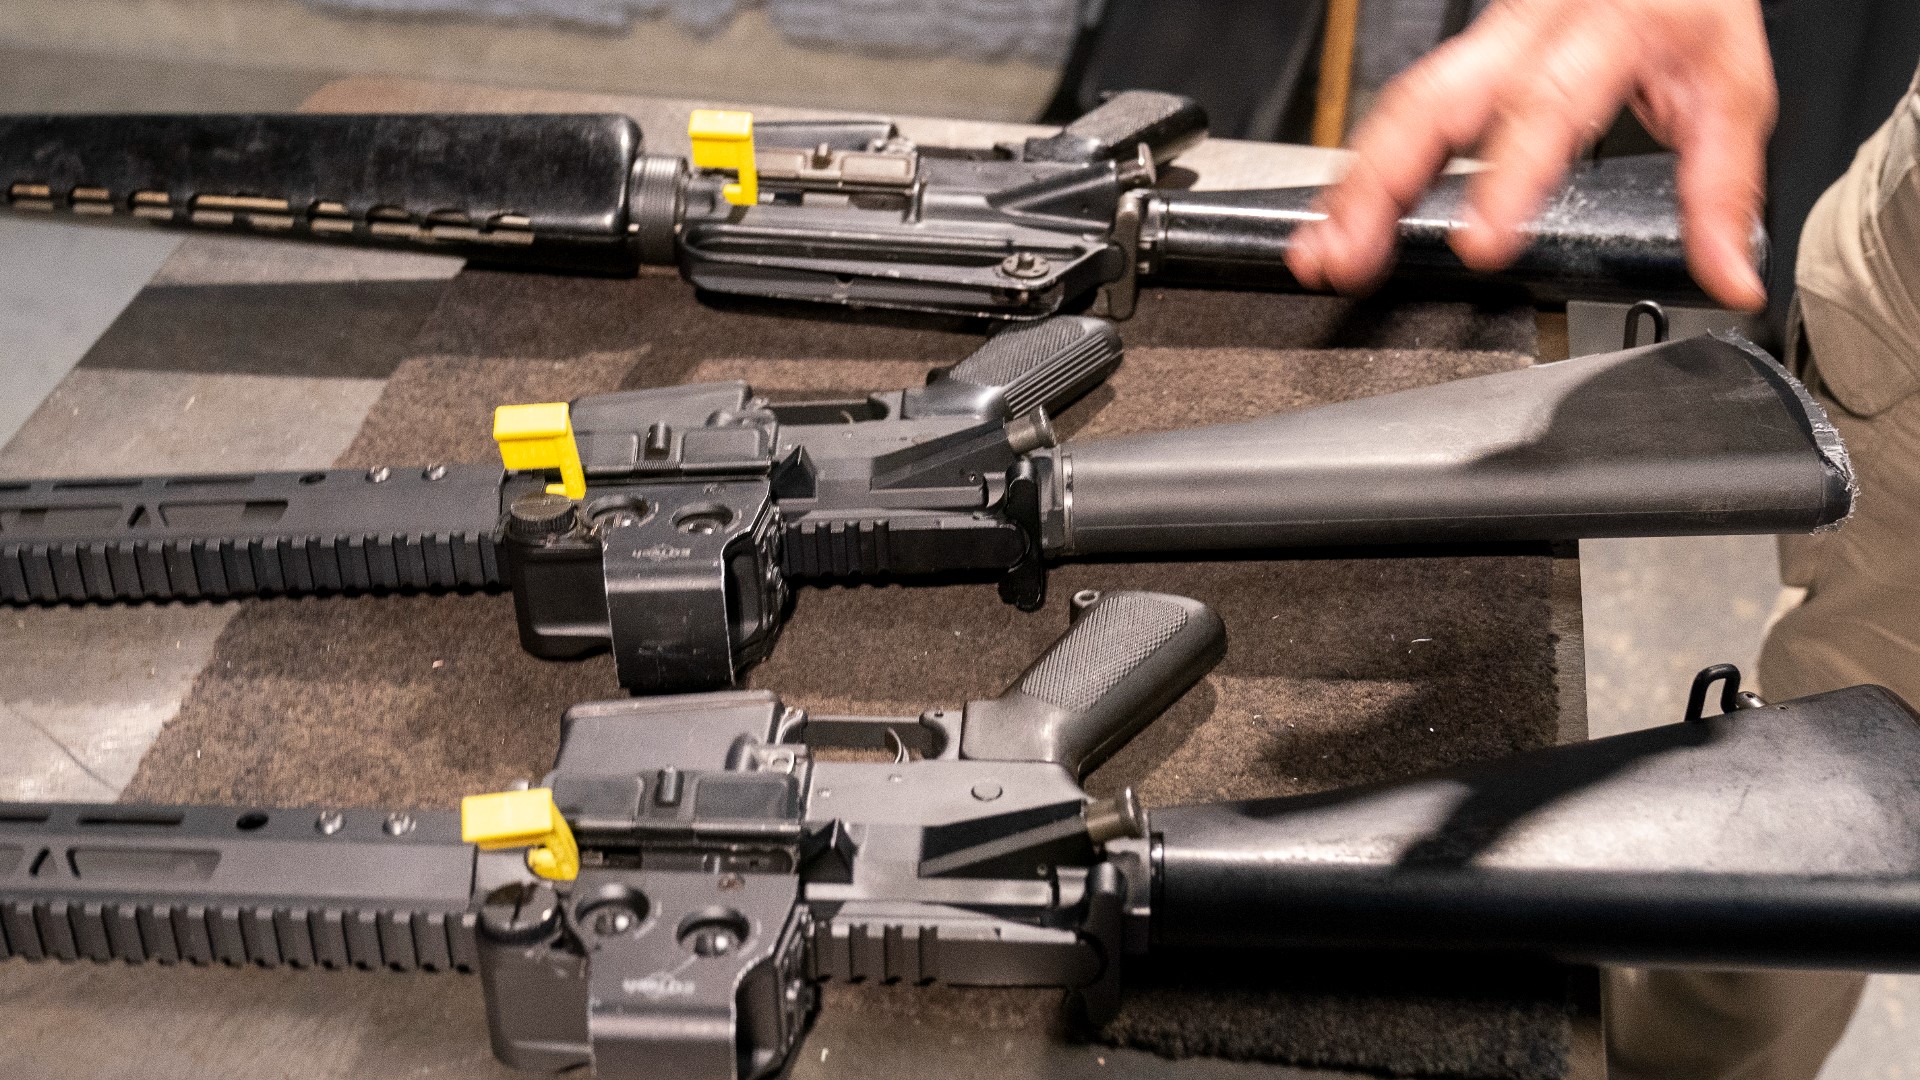 A surge of illegal homemade machine guns has helped fuel gun violence in the U.S.